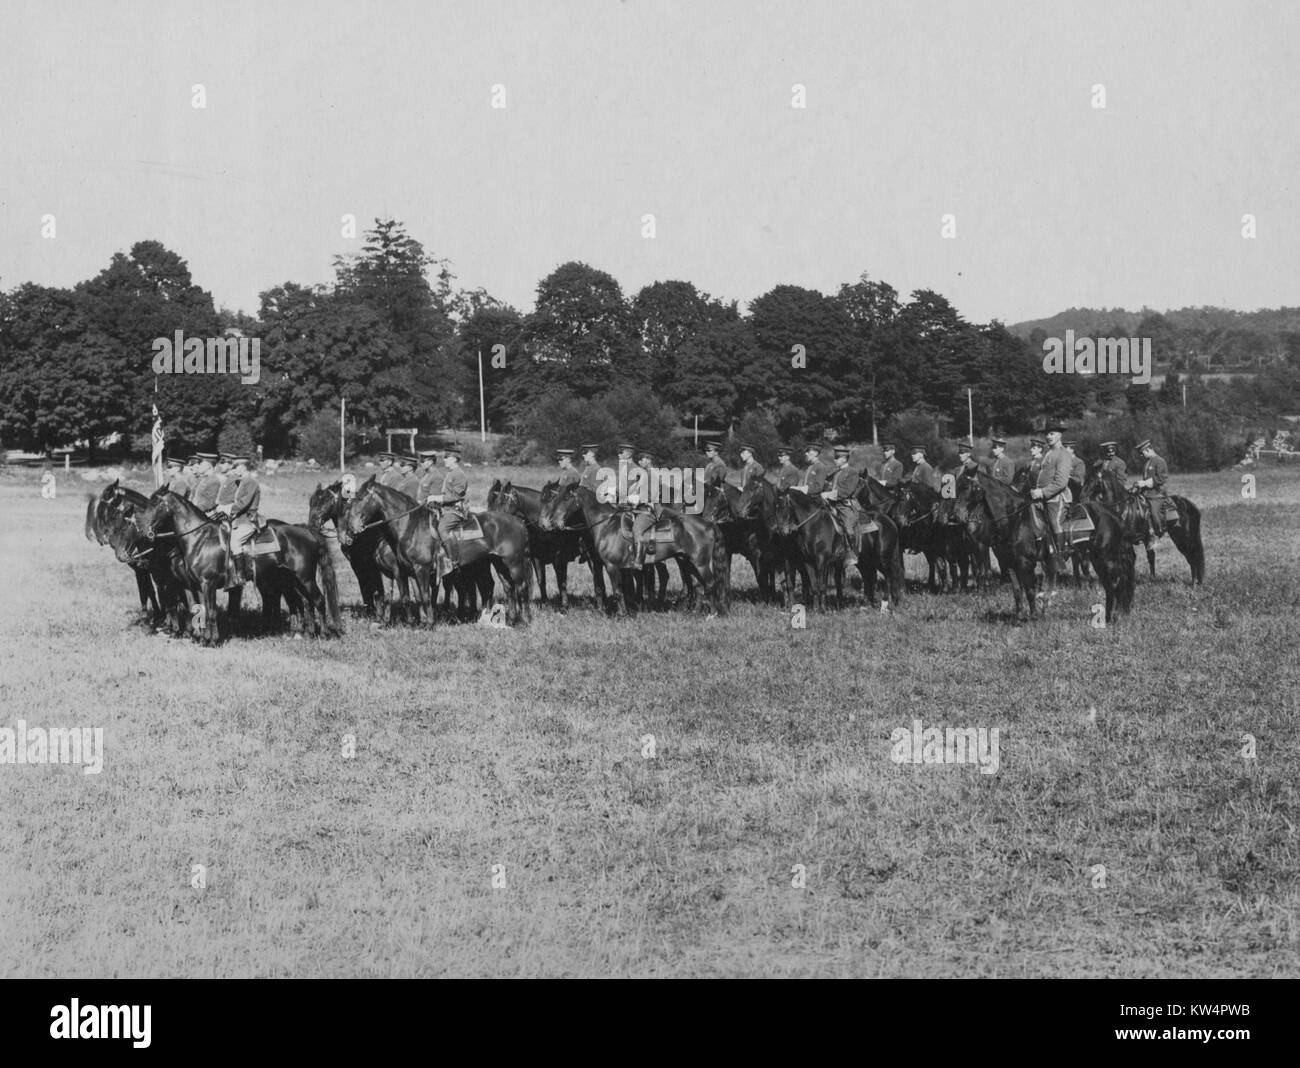 Troop of mounted policemen in columns of fours in a field in Kensico, New York, September 15, 1914. From the New York Public Library. Stock Photo